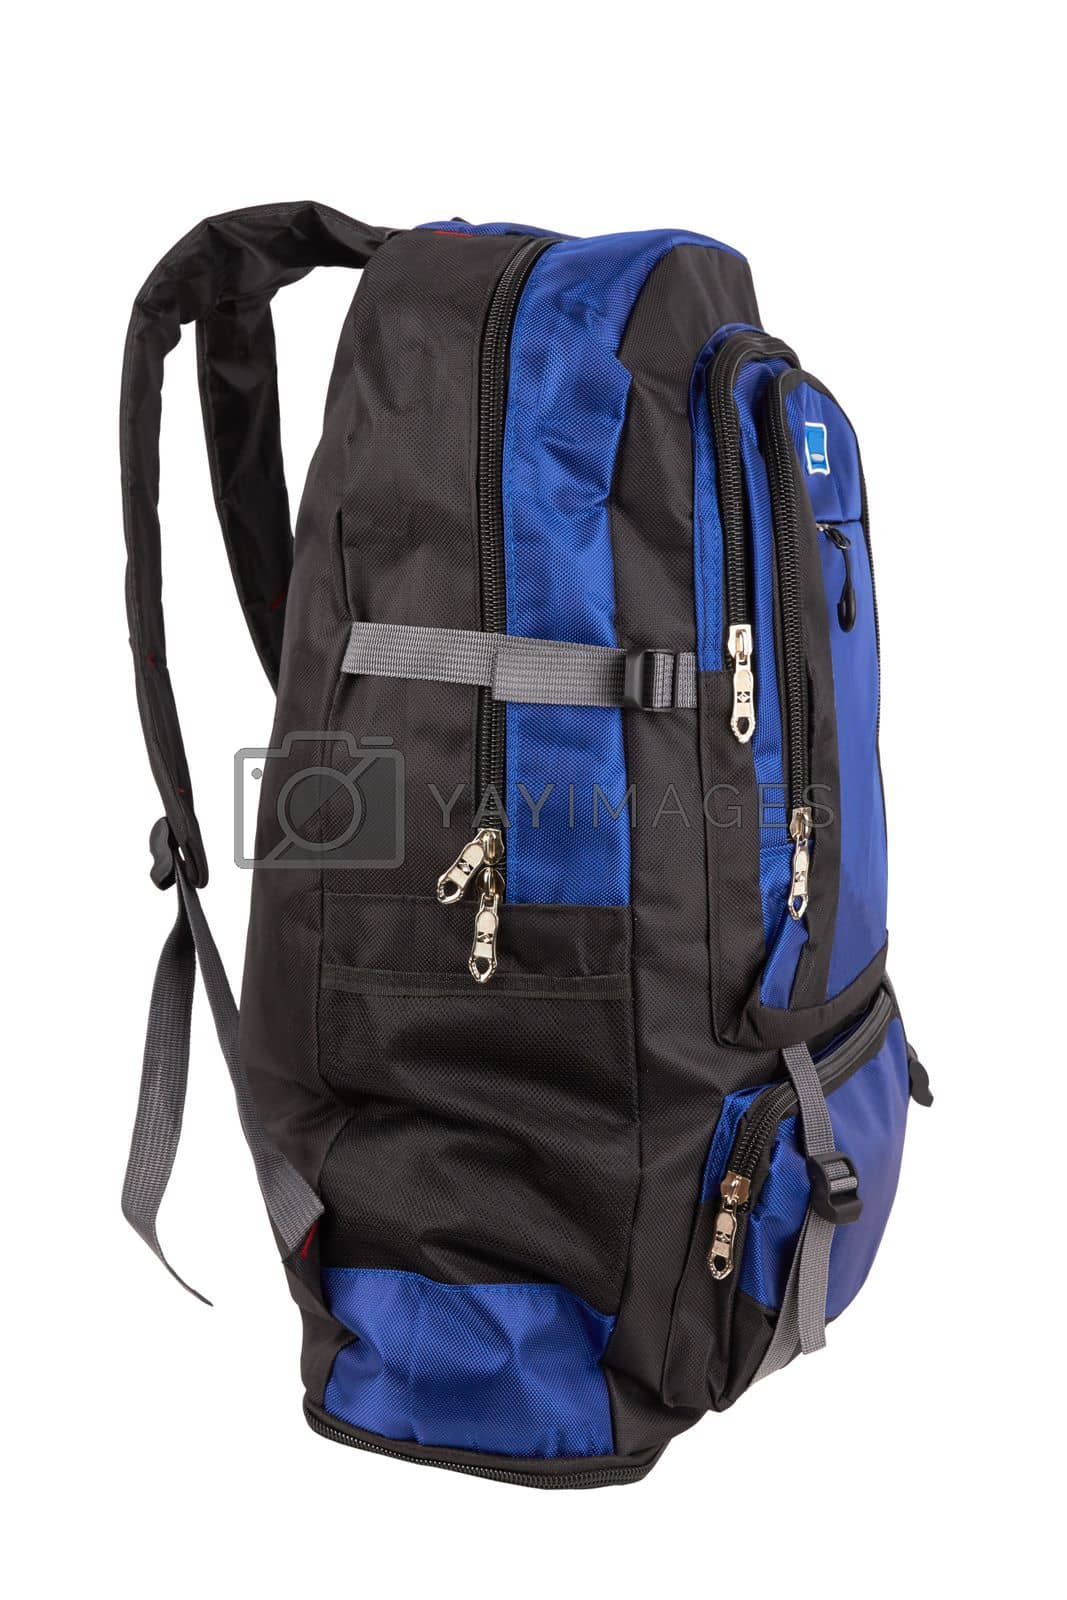 Royalty free image of Big backpack for travel by pioneer111